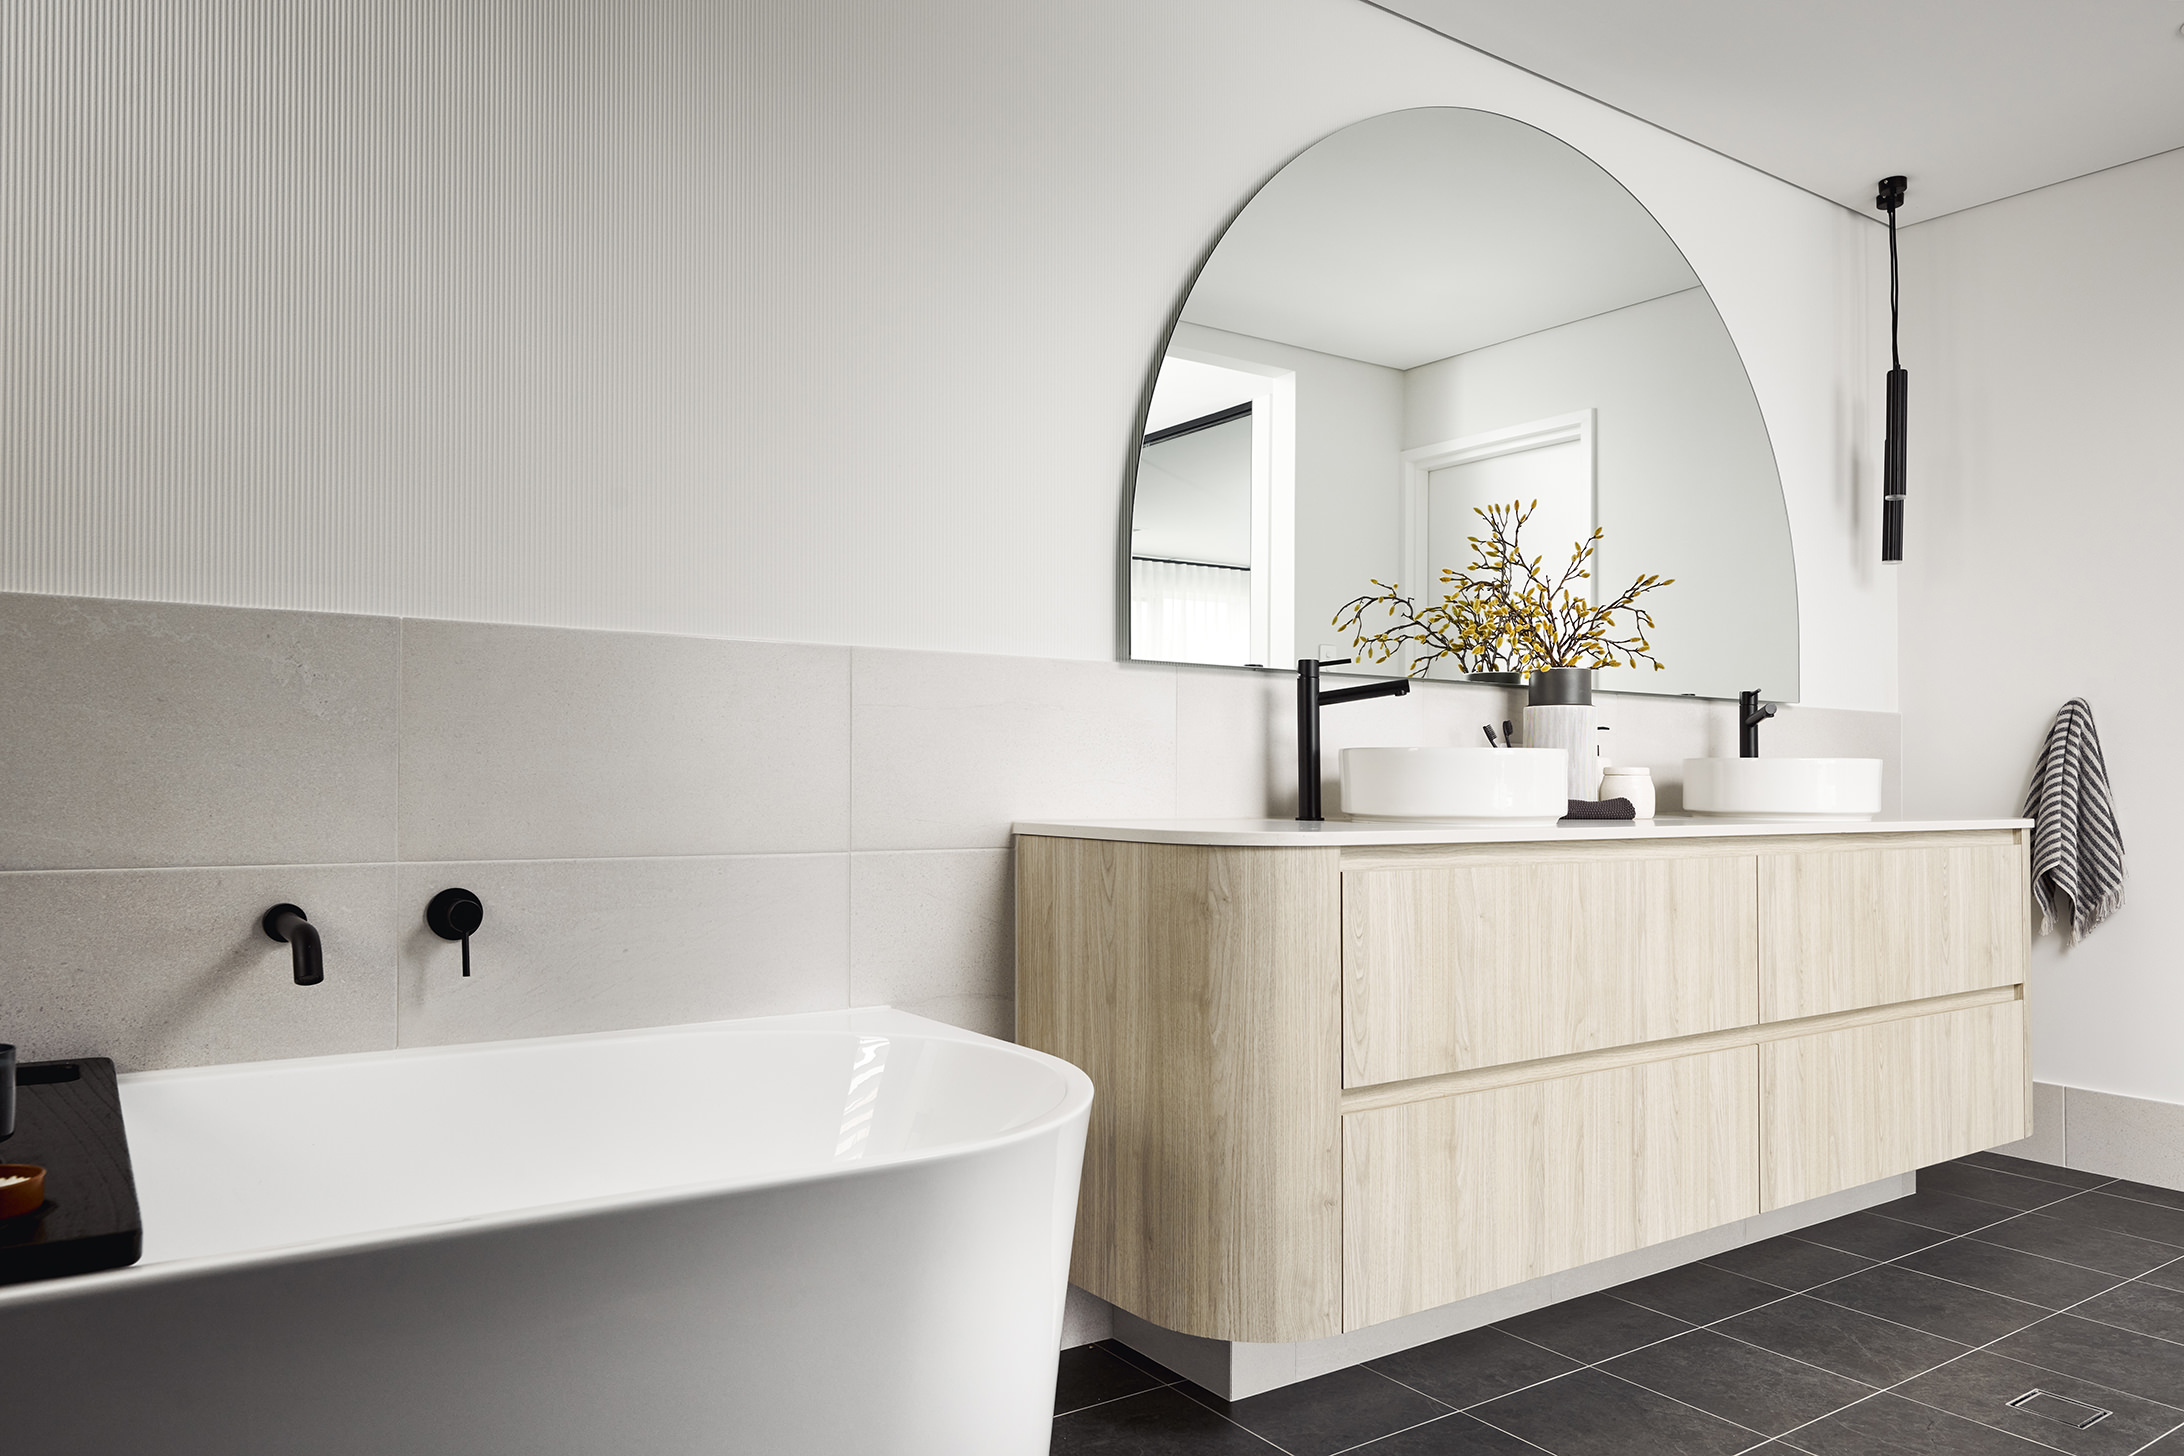 Catalina, Mindarie and Clarkson, Catalina Dale Alcock Oslo ensuite